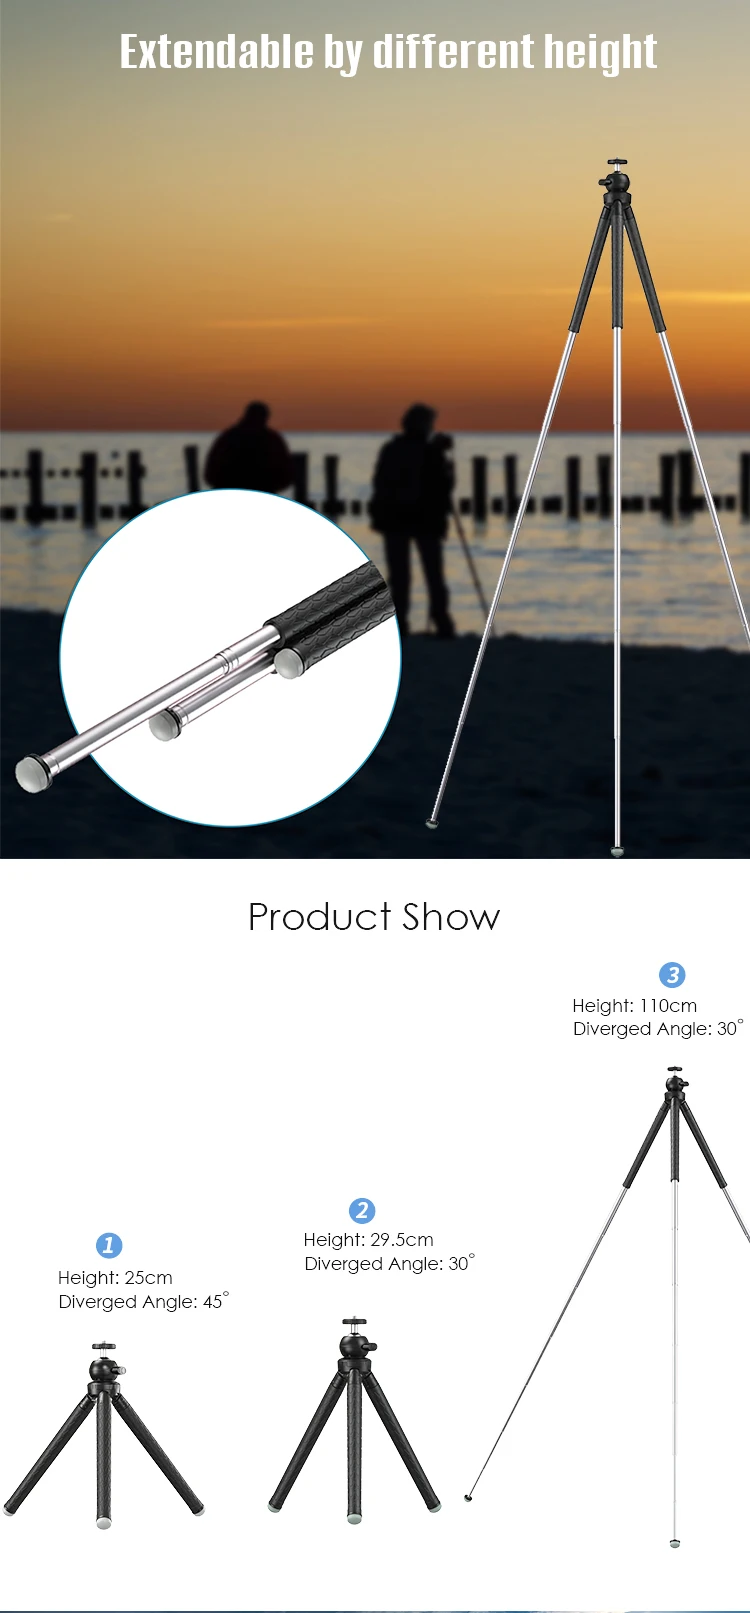 APEXEL Lightweight Camera Tripod for Smartphone,Flexible Professional Cell Phone Tripod Stand